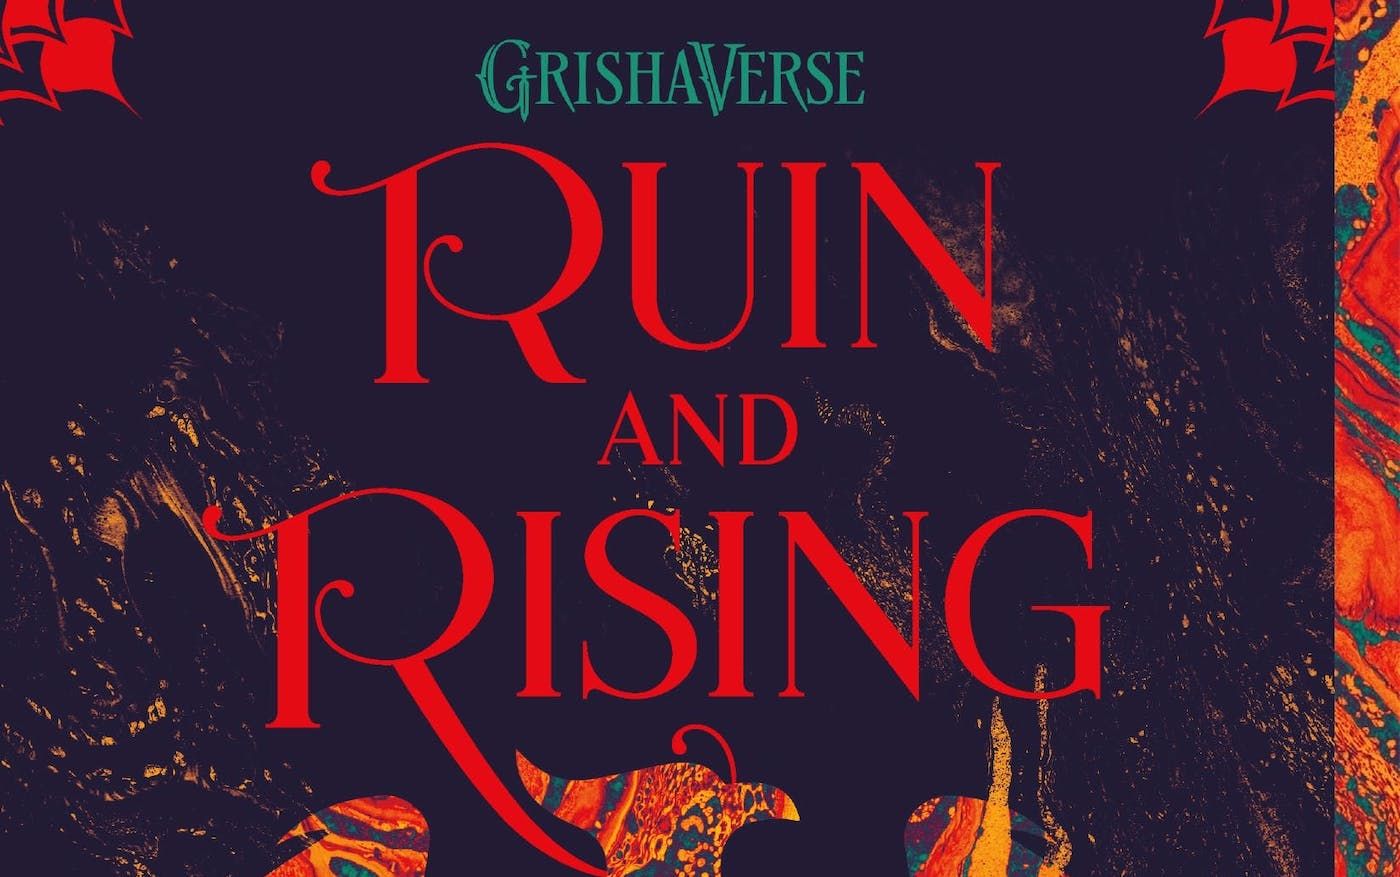 Run-and-rising-book-cover